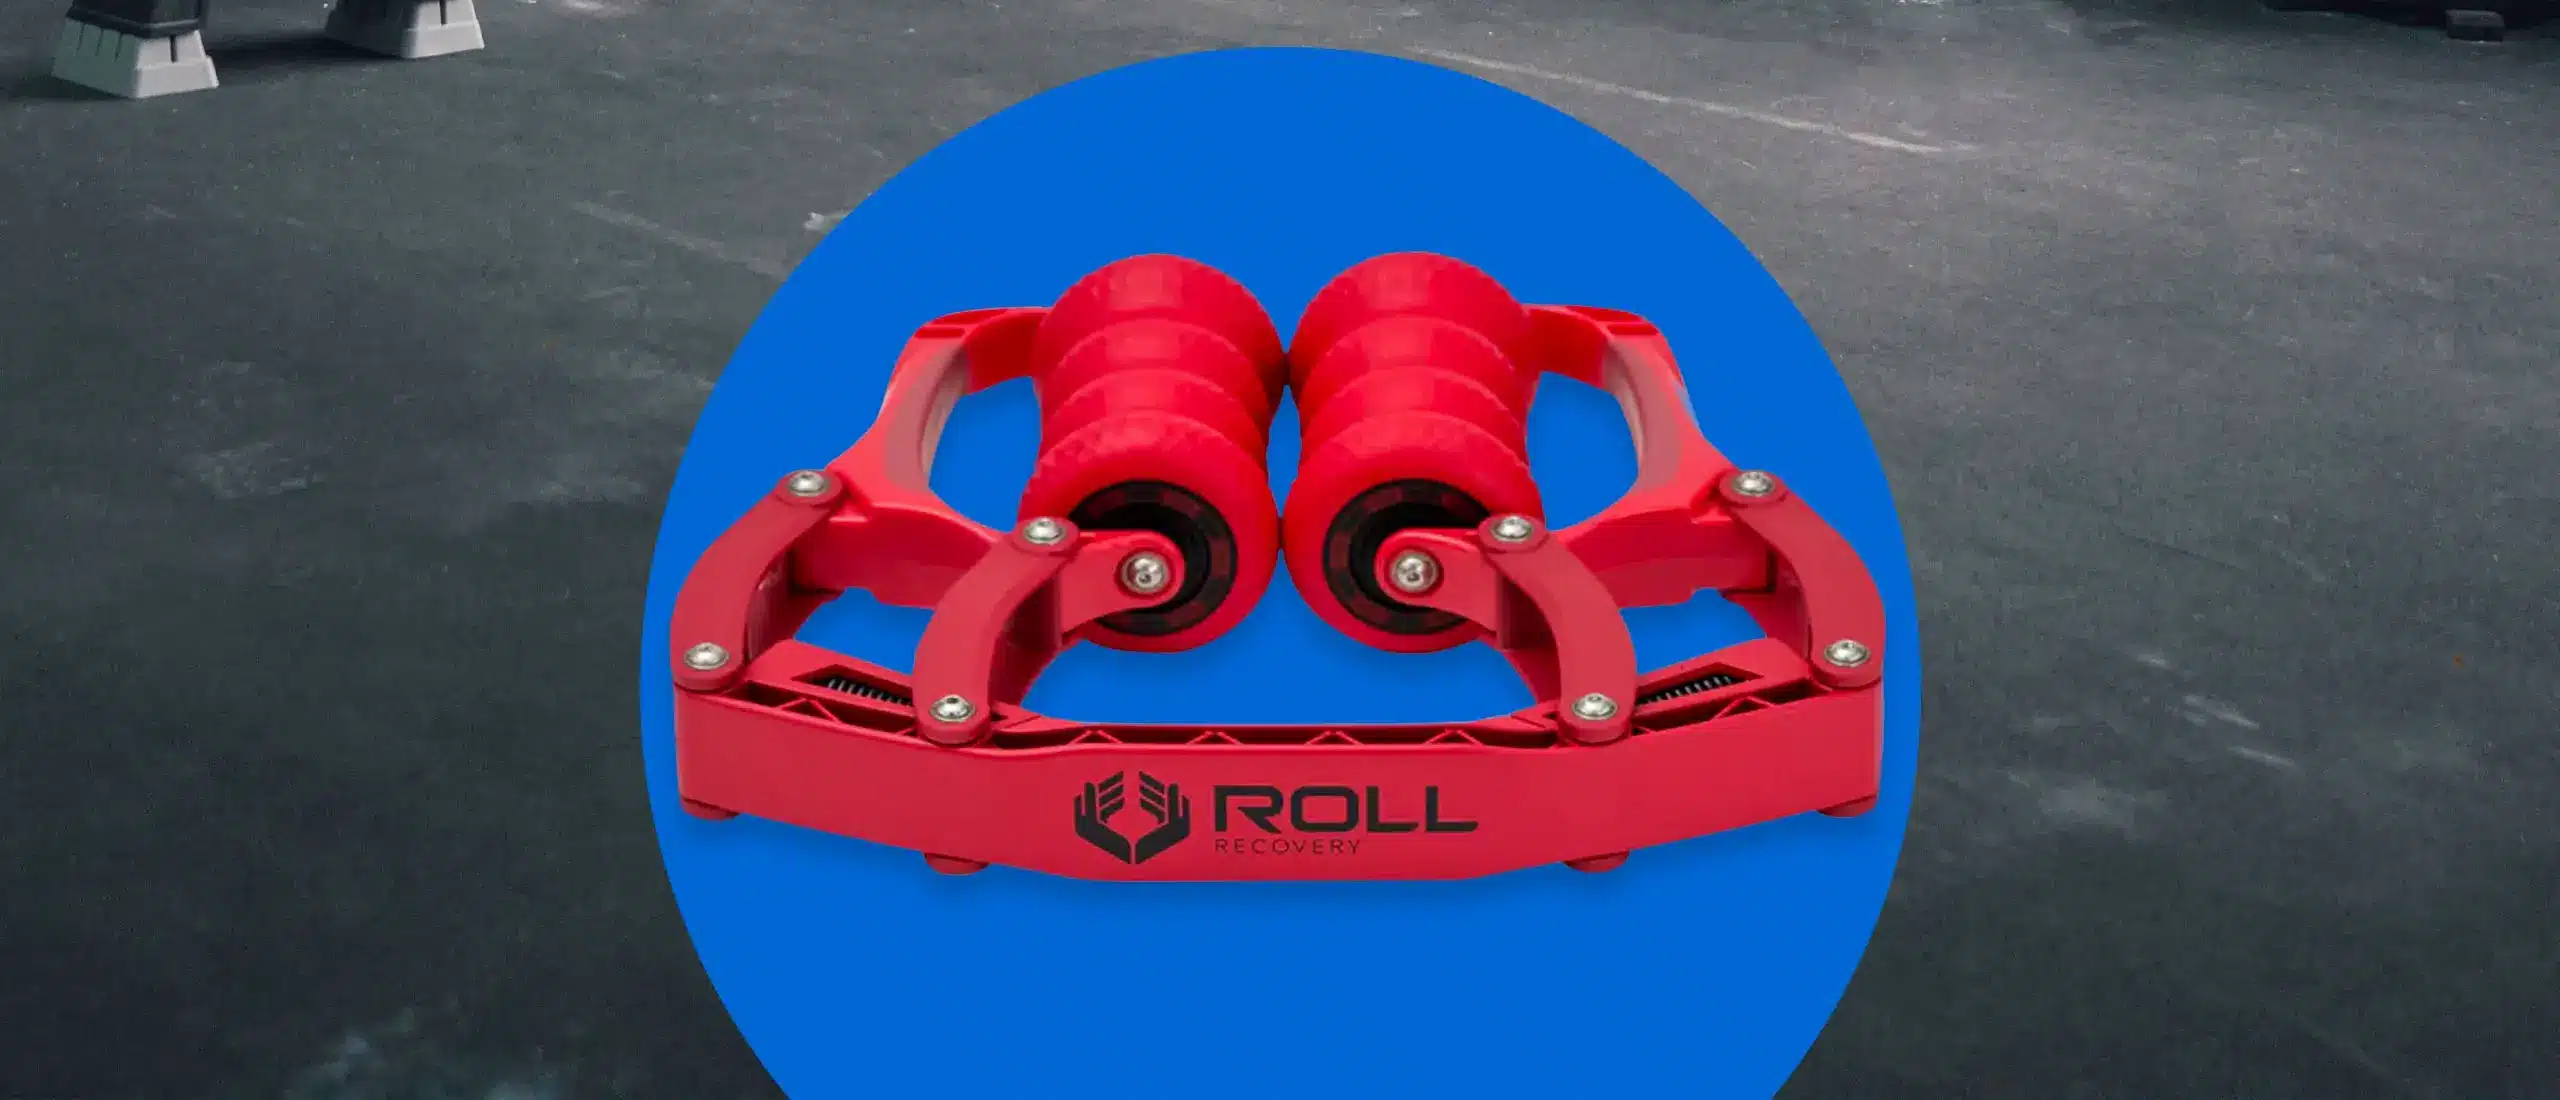 roll_recovery_r8